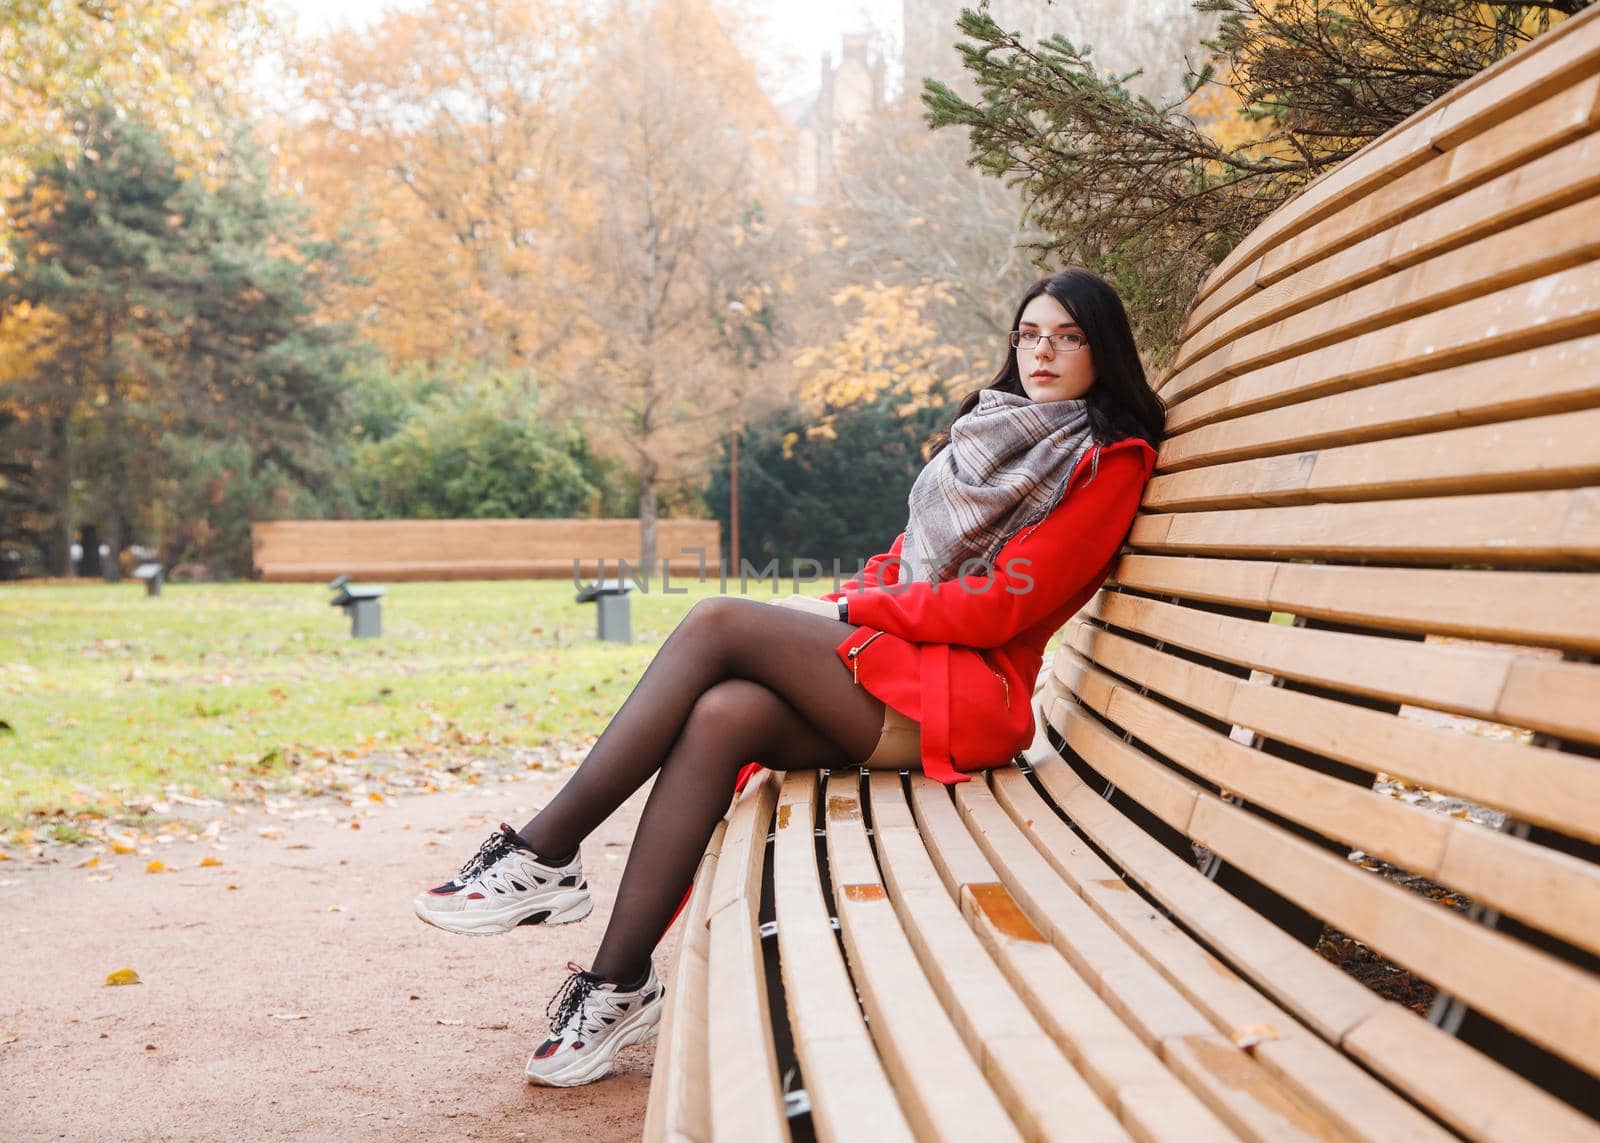 young beautiful girl in a red coat sitting on a bench in a city park after the rain on an autumn day